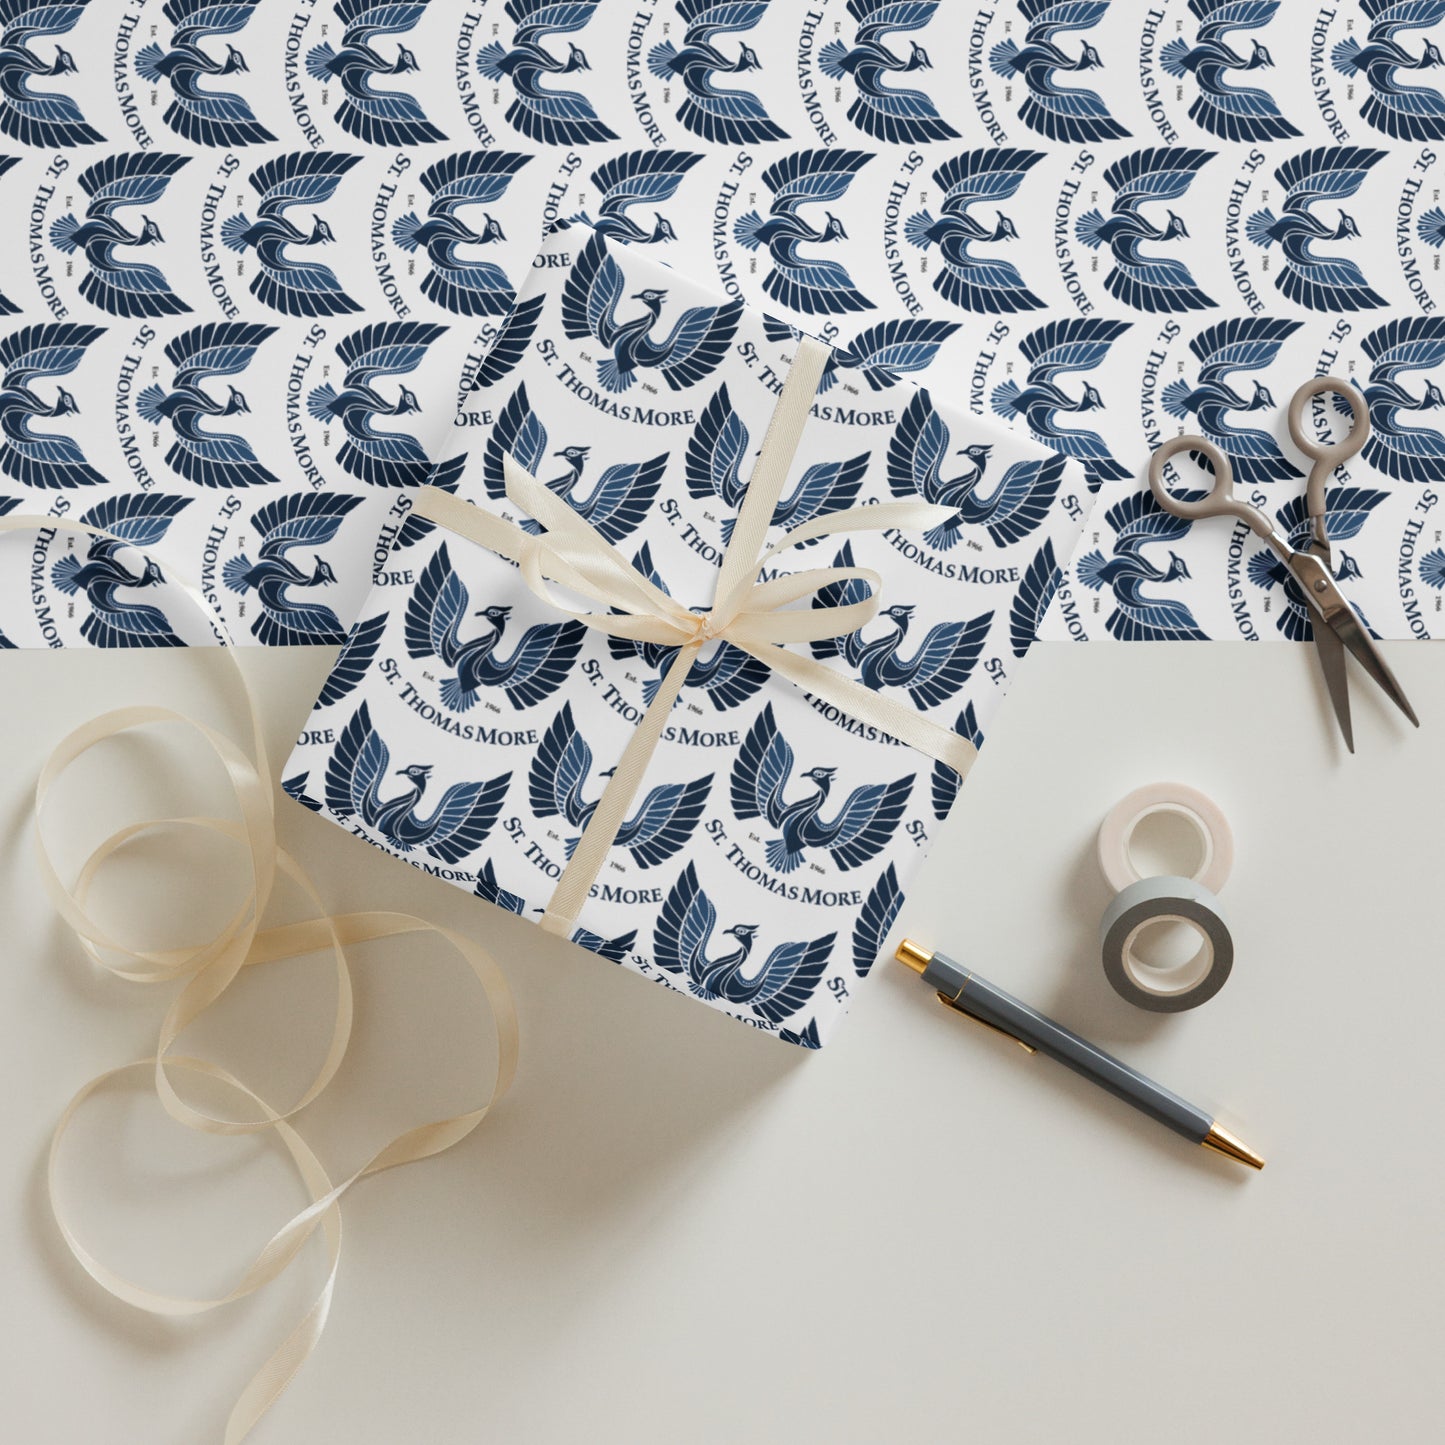 St. Thomas More Wrapping paper sheets